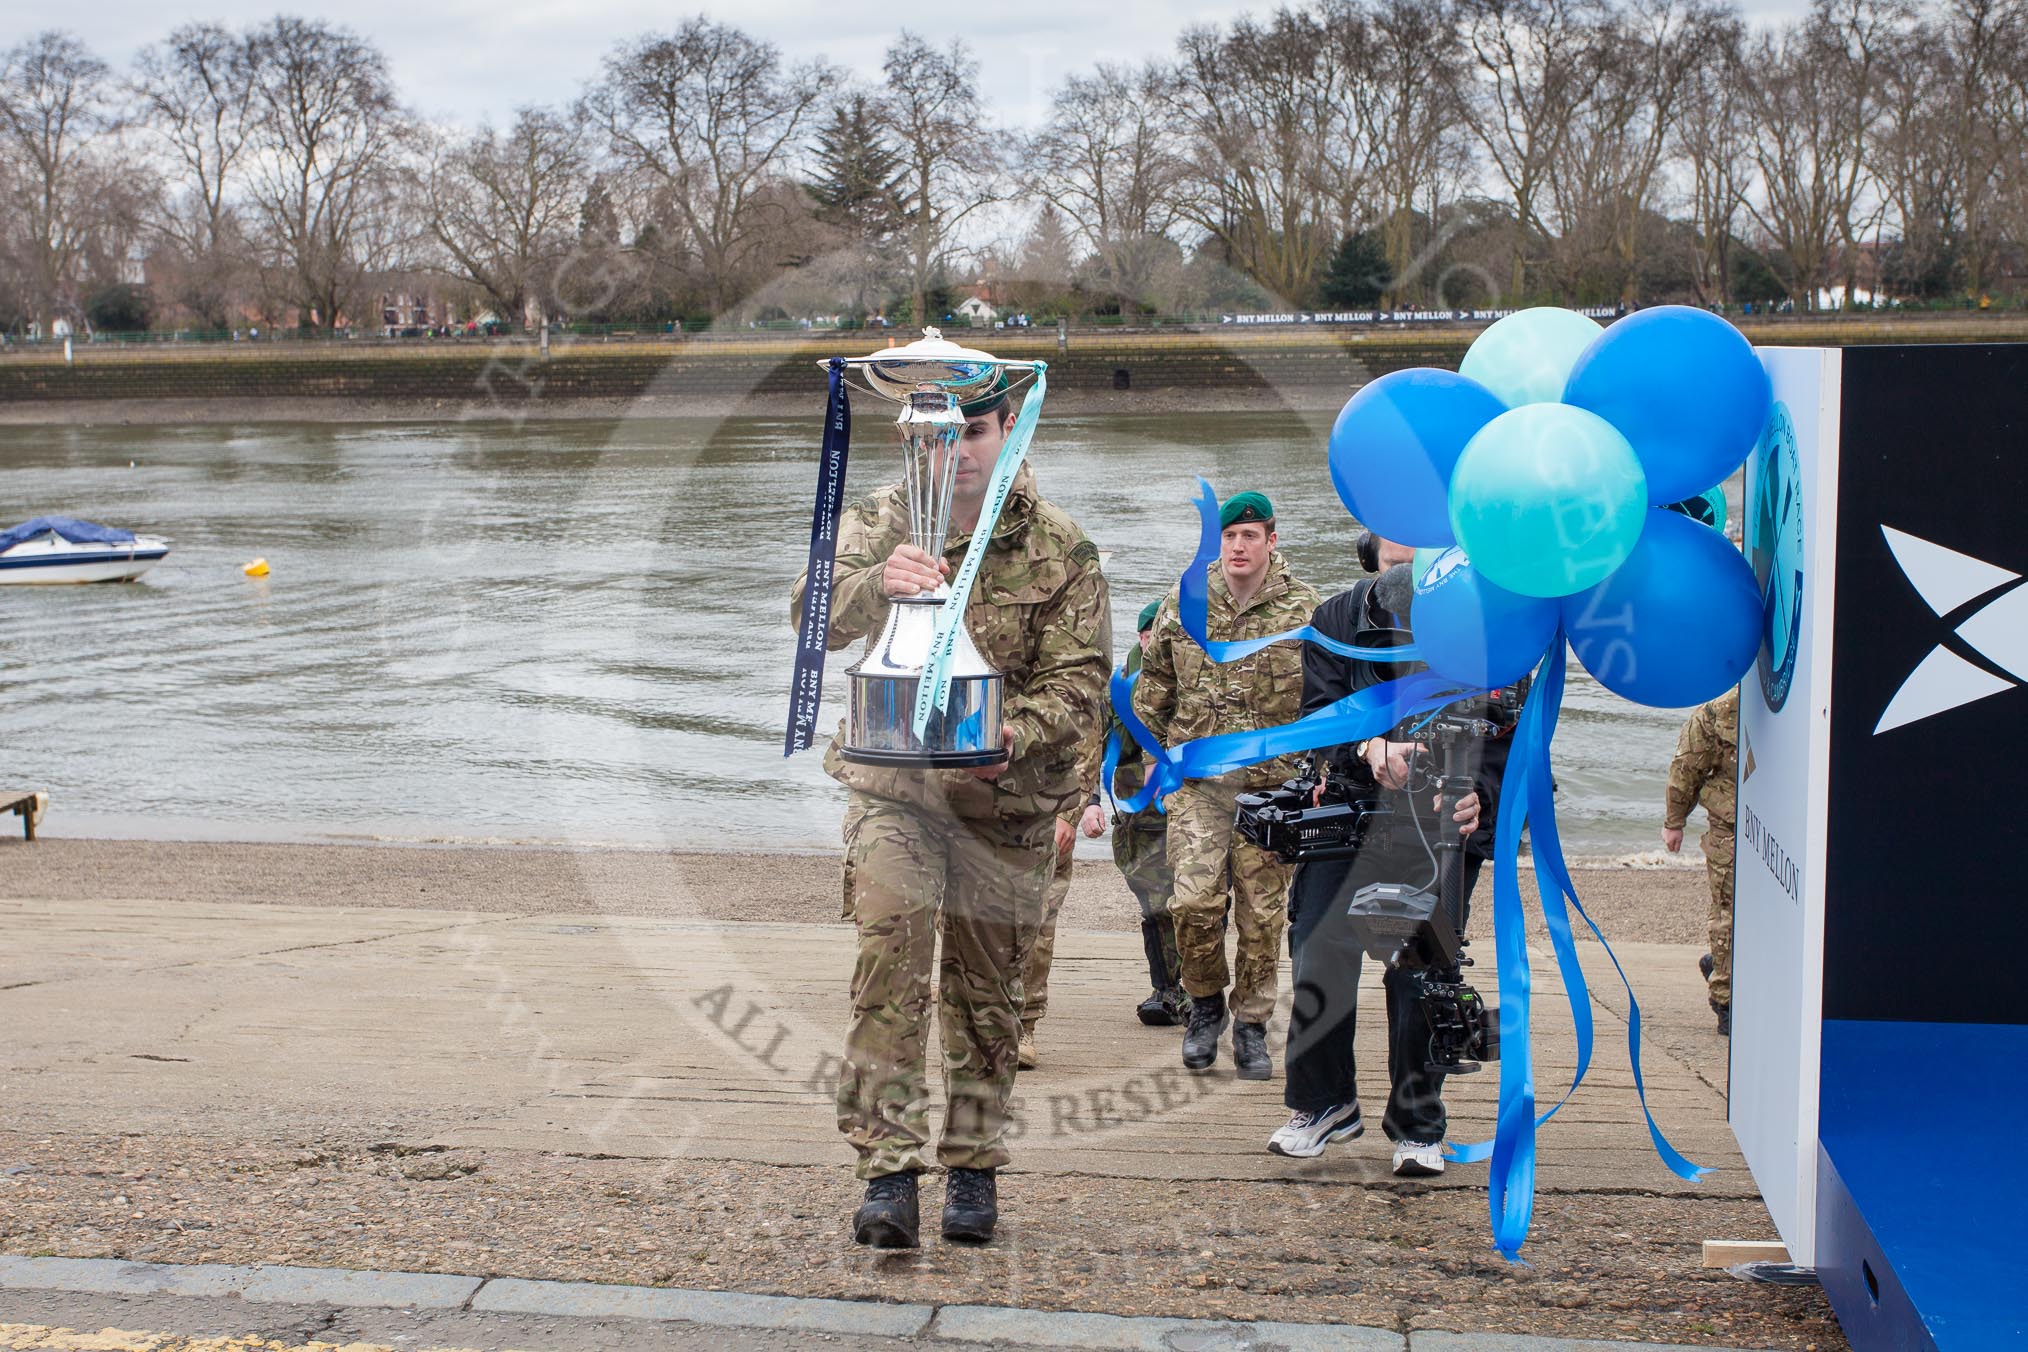 The Boat Race 2013: The 2013 Boat Race trophy is delivered by Royal Marines and closely wached by a BBC steadicam..
Putney,
London SW15,

United Kingdom,
on 31 March 2013 at 14:14, image #68